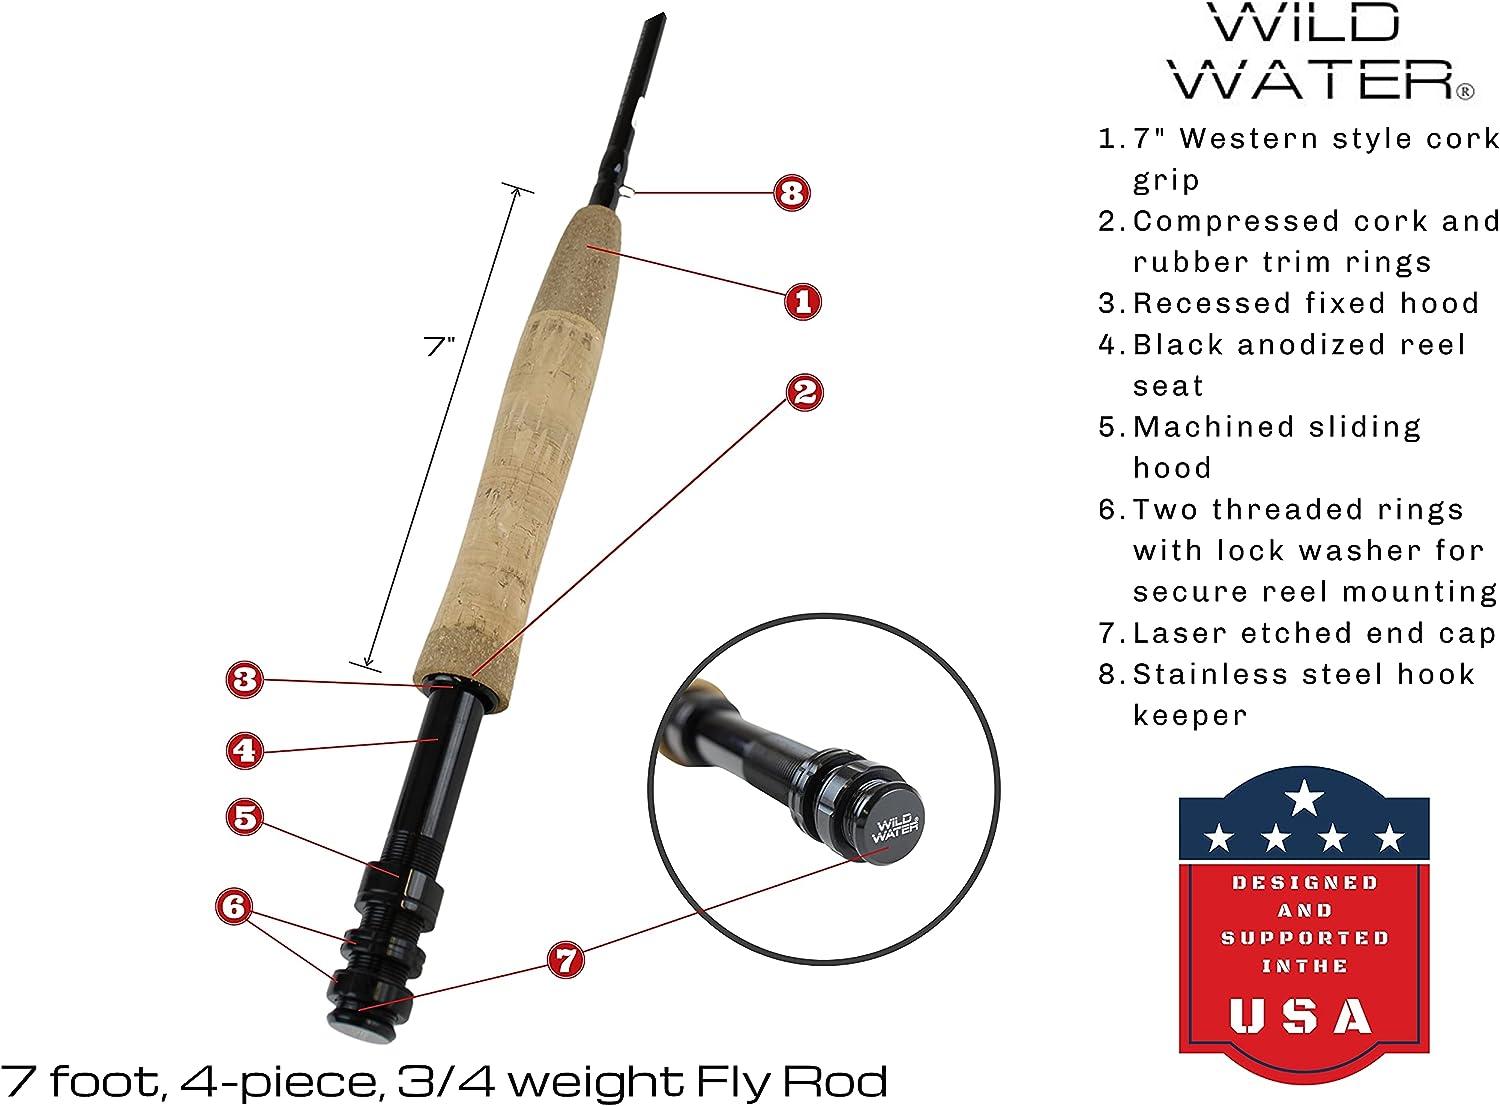 Wild Water Deluxe Fly Fishing Combo Starter Kit, 7-Foot Pole, 4-Piece Fly  Rod Kit, 3/4 Weight, Fishing Accessories, Includes Die cast Aluminum Reel  and Hard Tube Case with Pouch, Fly Box and